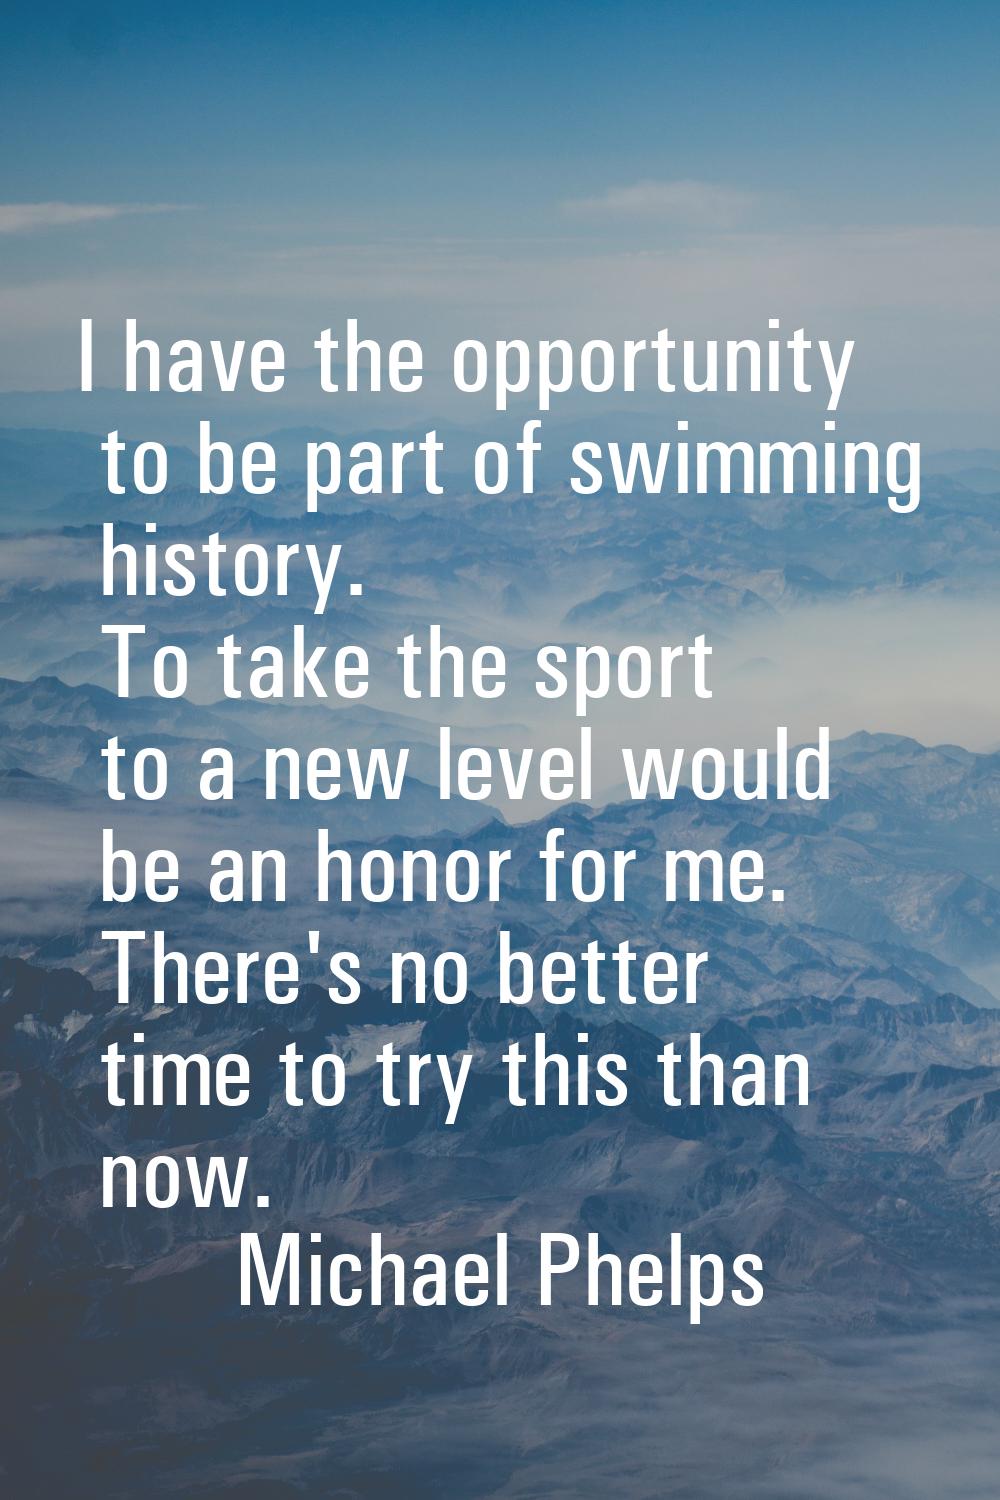 I have the opportunity to be part of swimming history. To take the sport to a new level would be an